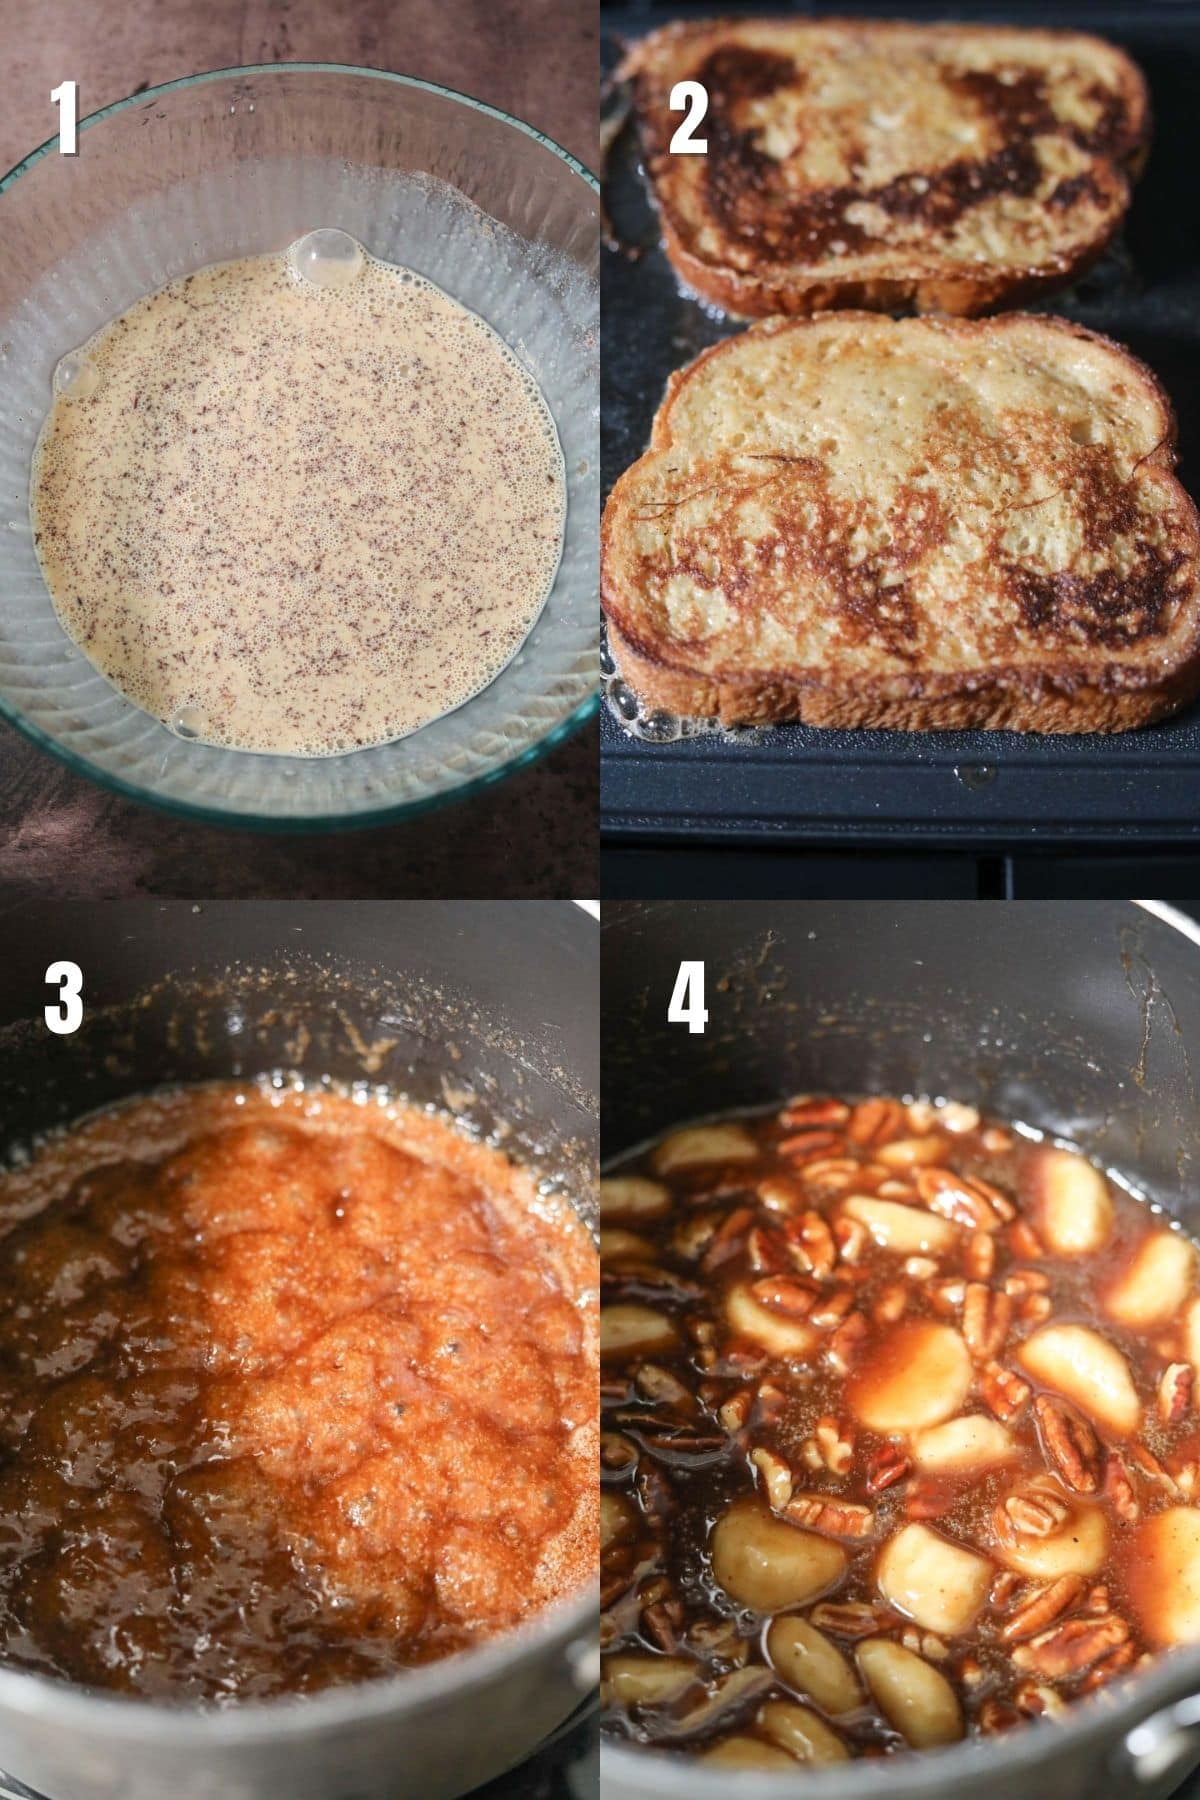 Step by step images for making bananas foster French toast.